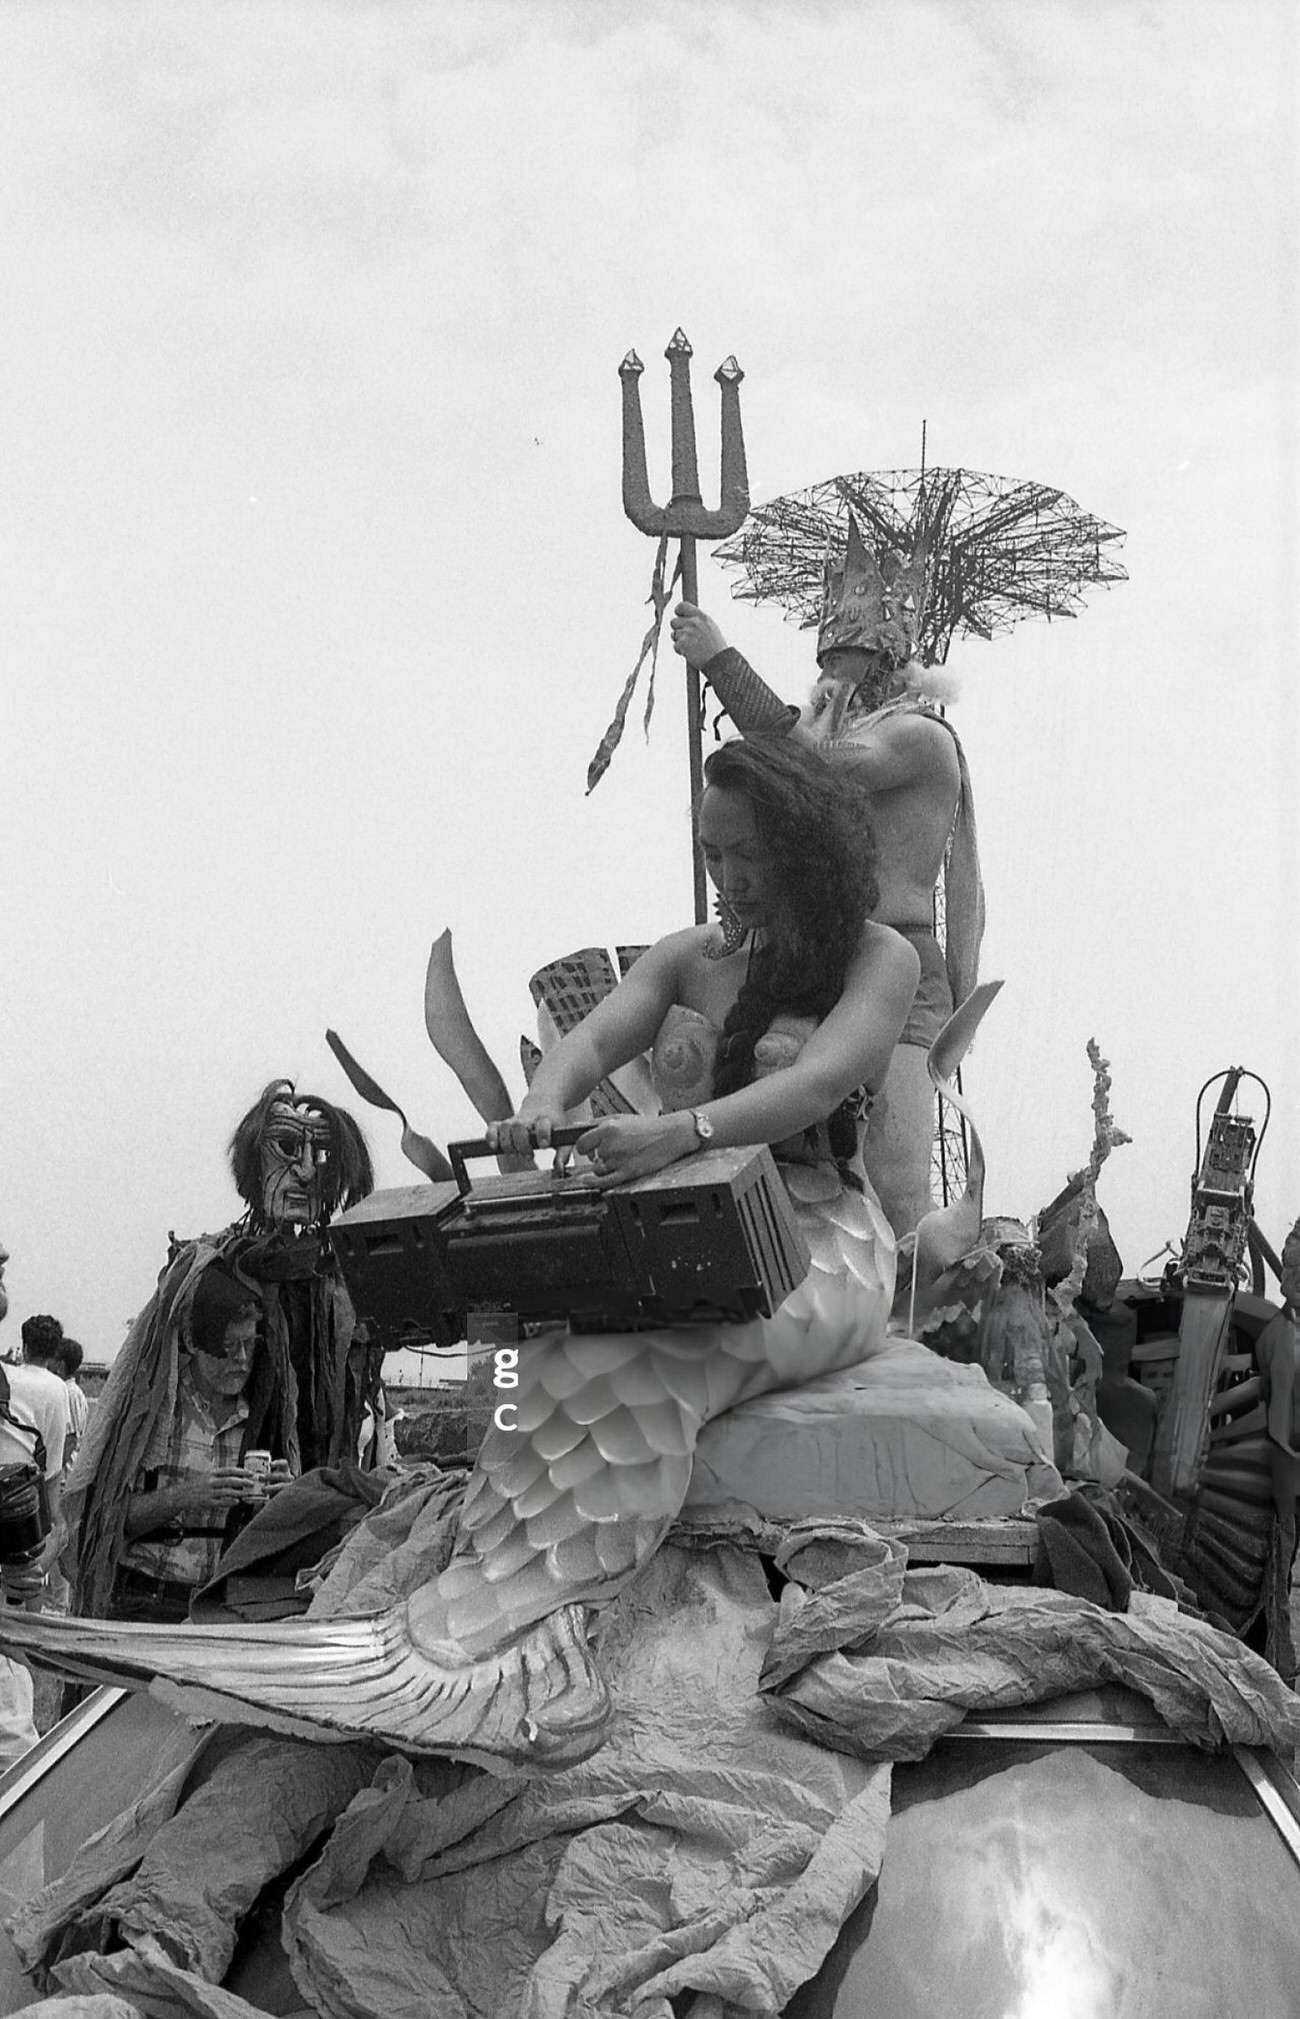 A Woman Dressed As A Mermaid And A Man Dressed As King Triton During The Coney Island Mermaid Parade, 1989.